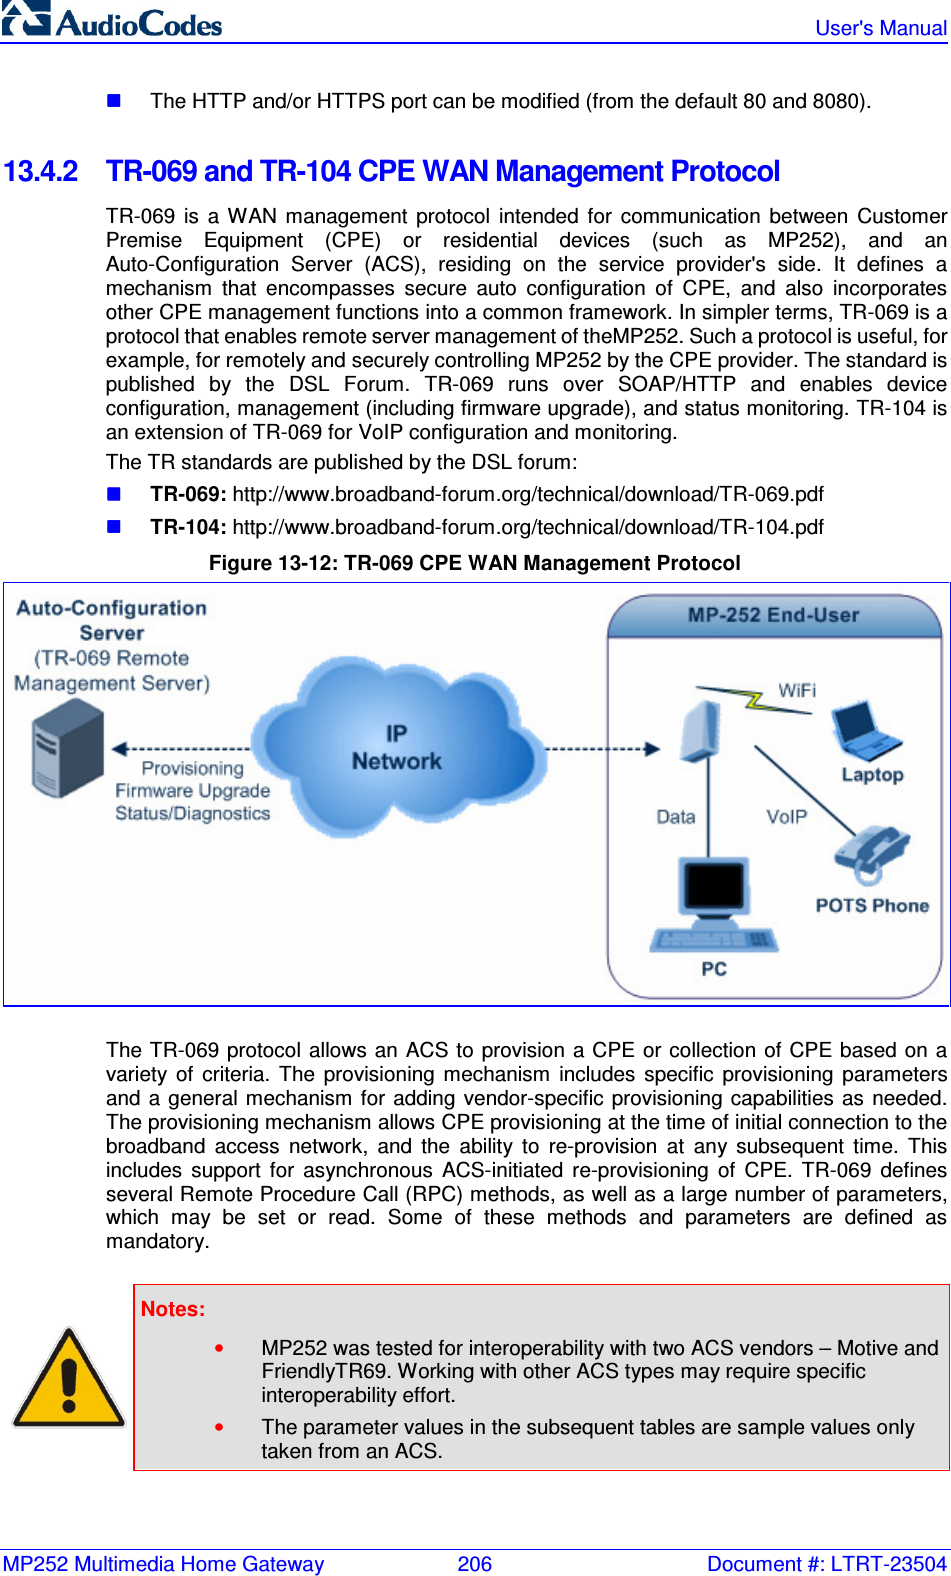 MP252 Multimedia Home Gateway  206  Document #: LTRT-23504   User&apos;s Manual   The HTTP and/or HTTPS port can be modified (from the default 80 and 8080).  13.4.2  TR-069 and TR-104 CPE WAN Management Protocol TR-069  is  a WAN  management  protocol  intended  for  communication  between  Customer Premise  Equipment  (CPE)  or  residential  devices  (such  as  MP252),  and  an Auto-Configuration  Server  (ACS),  residing  on  the  service  provider&apos;s  side.  It  defines  a mechanism  that  encompasses  secure  auto  configuration  of  CPE,  and  also  incorporates other CPE management functions into a common framework. In simpler terms, TR-069 is a protocol that enables remote server management of theMP252. Such a protocol is useful, for example, for remotely and securely controlling MP252 by the CPE provider. The standard is published  by  the  DSL  Forum.  TR-069  runs  over  SOAP/HTTP  and  enables  device configuration, management (including firmware upgrade), and status monitoring. TR-104 is an extension of TR-069 for VoIP configuration and monitoring. The TR standards are published by the DSL forum:  TR-069: http://www.broadband-forum.org/technical/download/TR-069.pdf   TR-104: http://www.broadband-forum.org/technical/download/TR-104.pdf  Figure 13-12: TR-069 CPE WAN Management Protocol  The TR-069 protocol allows an  ACS to provision a CPE or collection of CPE based on  a variety  of  criteria.  The  provisioning  mechanism  includes  specific  provisioning  parameters and a  general mechanism  for  adding vendor-specific  provisioning  capabilities as  needed. The provisioning mechanism allows CPE provisioning at the time of initial connection to the broadband  access  network,  and  the  ability  to  re-provision  at  any  subsequent  time.  This includes  support  for  asynchronous  ACS-initiated  re-provisioning  of  CPE.  TR-069  defines several Remote Procedure Call (RPC) methods, as well as a large number of parameters, which  may  be  set  or  read.  Some  of  these  methods  and  parameters  are  defined  as mandatory.    Notes:   • MP252 was tested for interoperability with two ACS vendors – Motive and FriendlyTR69. Working with other ACS types may require specific interoperability effort. • The parameter values in the subsequent tables are sample values only taken from an ACS.   